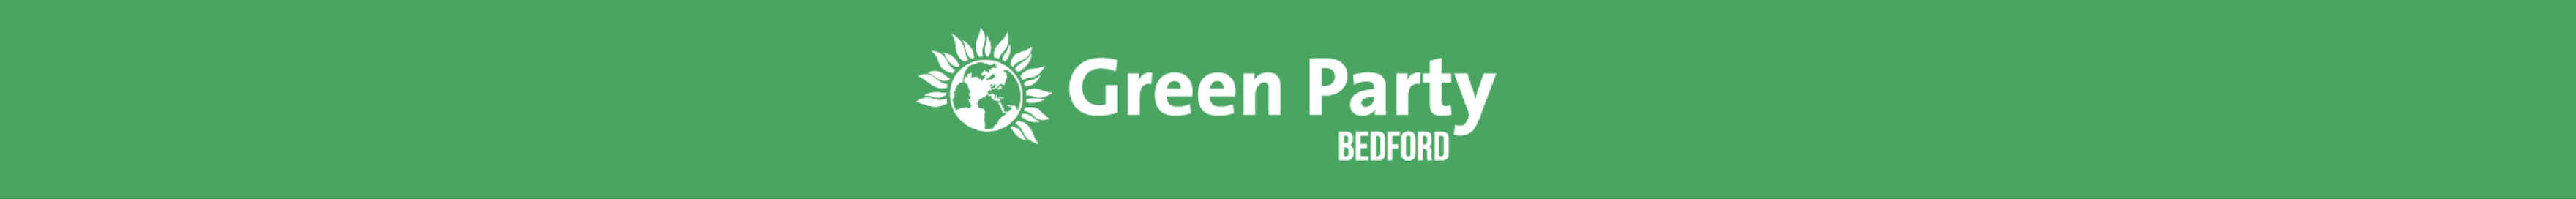 Bedford Green Party with World and flower petals image banner image.